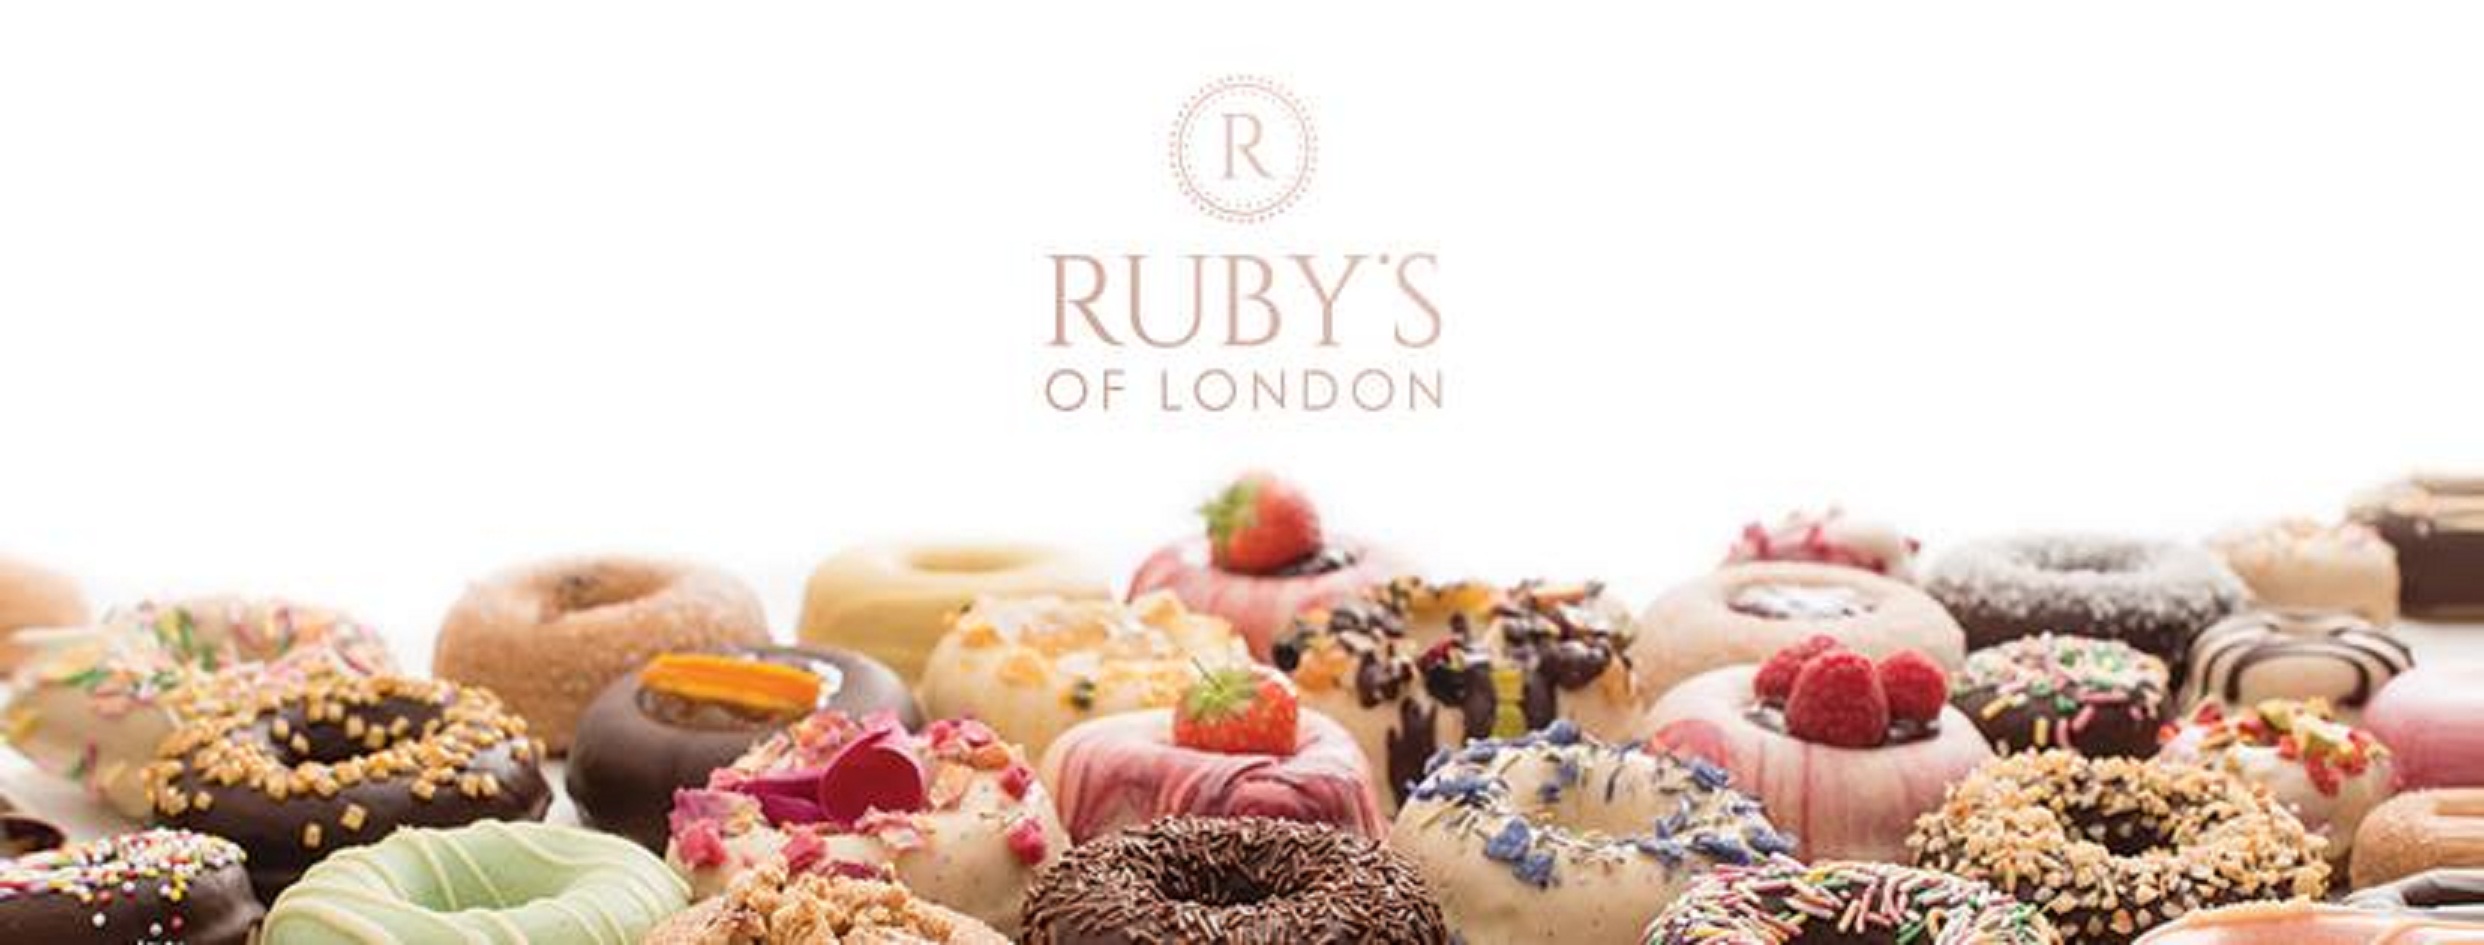 Ruby's of London